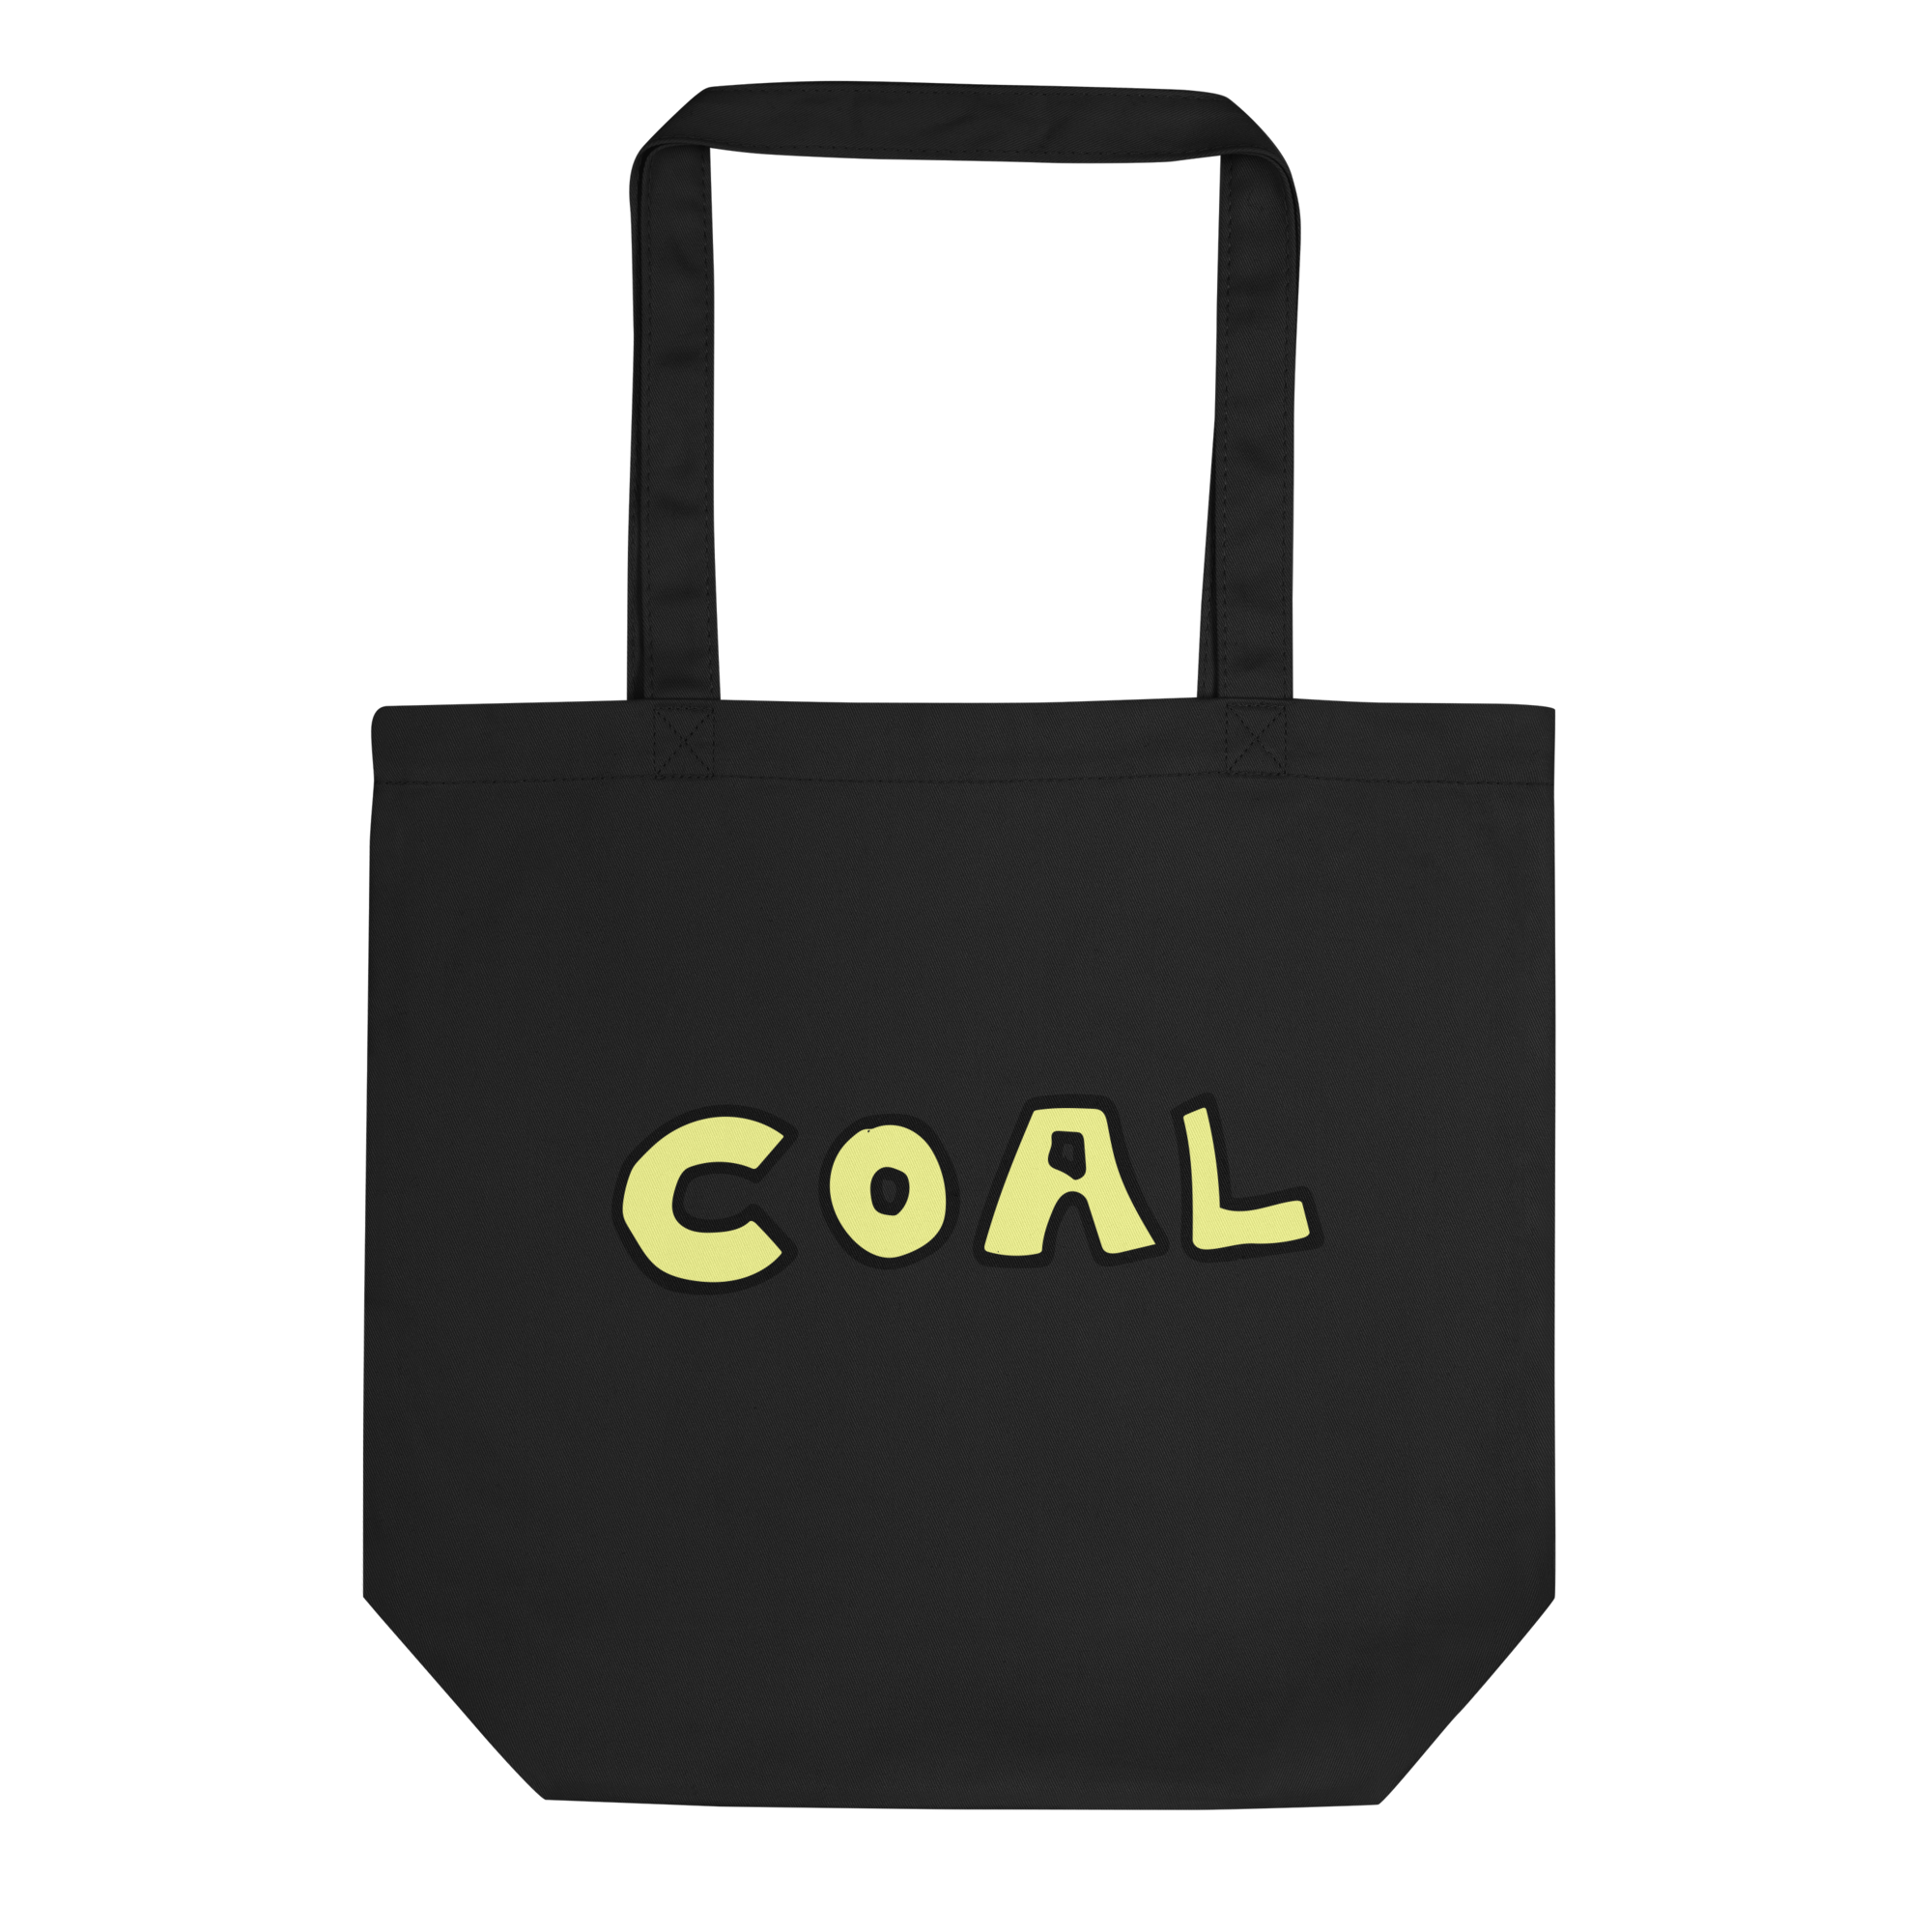 805 Coal Sack Royalty-Free Photos and Stock Images | Shutterstock